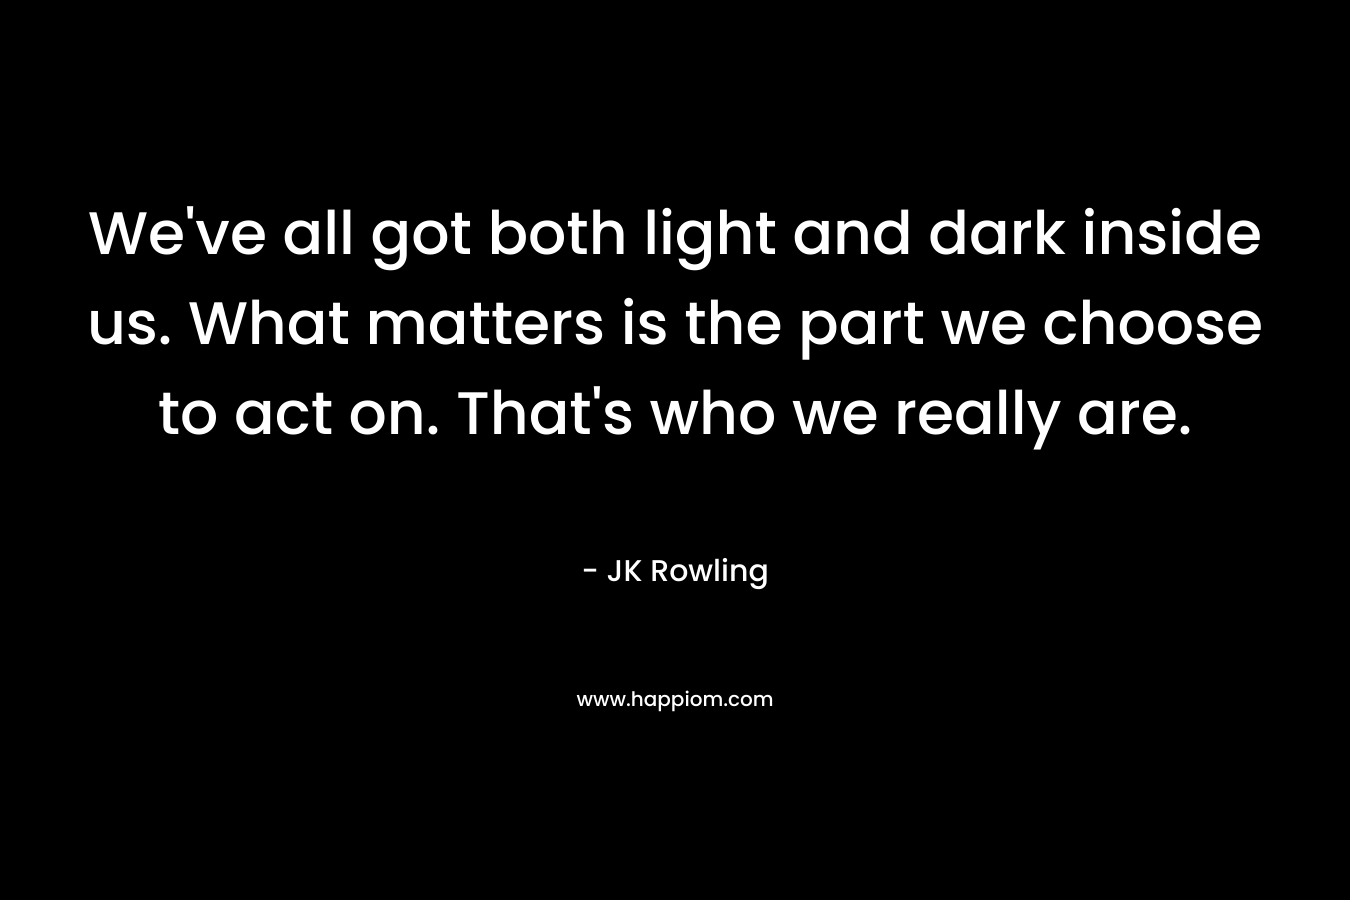 We've all got both light and dark inside us. What matters is the part we choose to act on. That's who we really are.